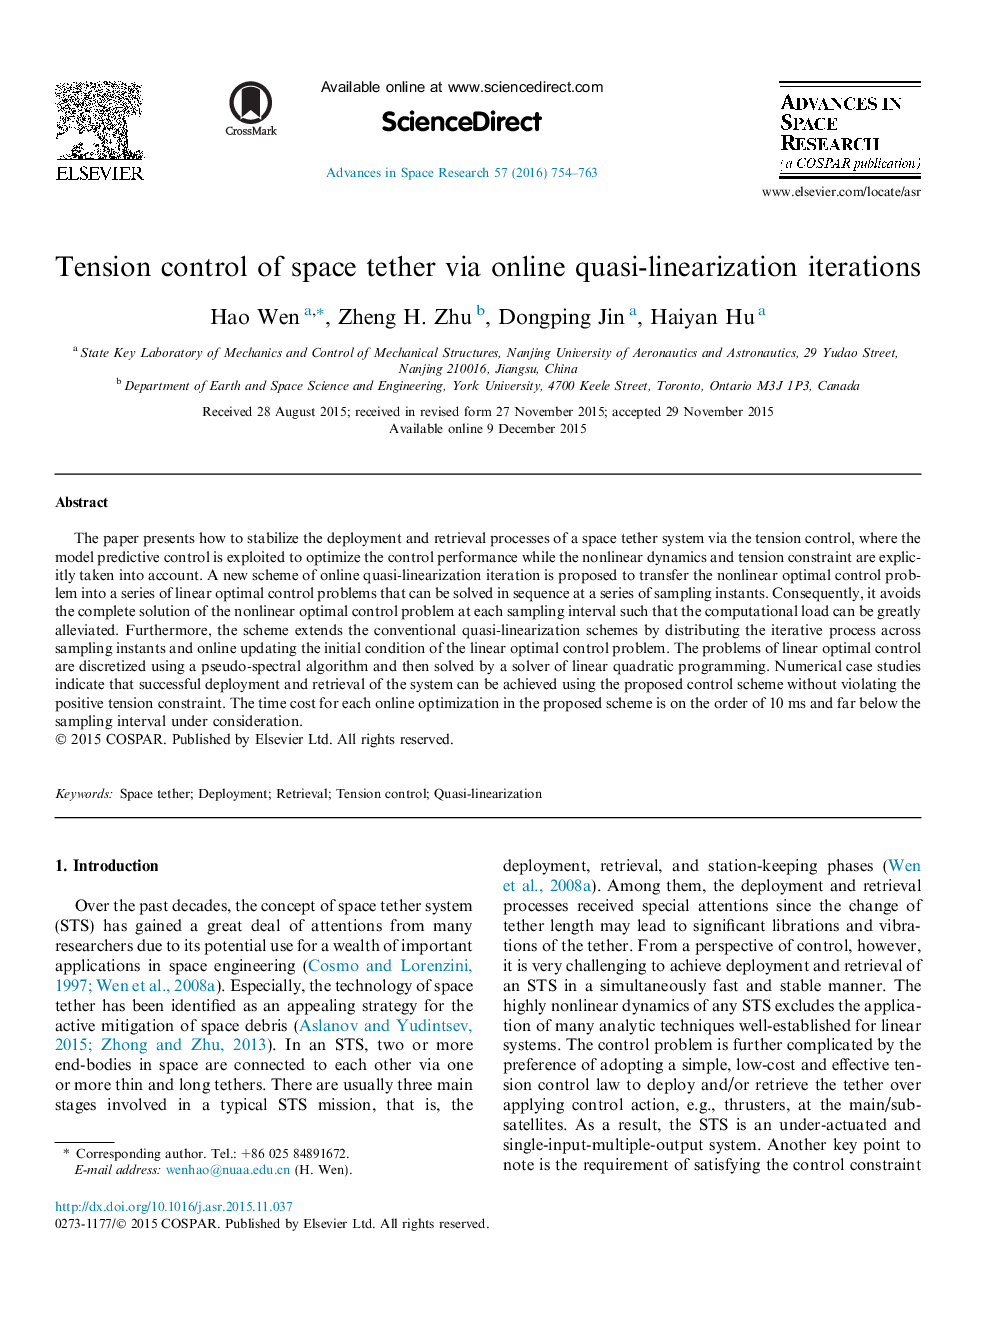 Tension control of space tether via online quasi-linearization iterations